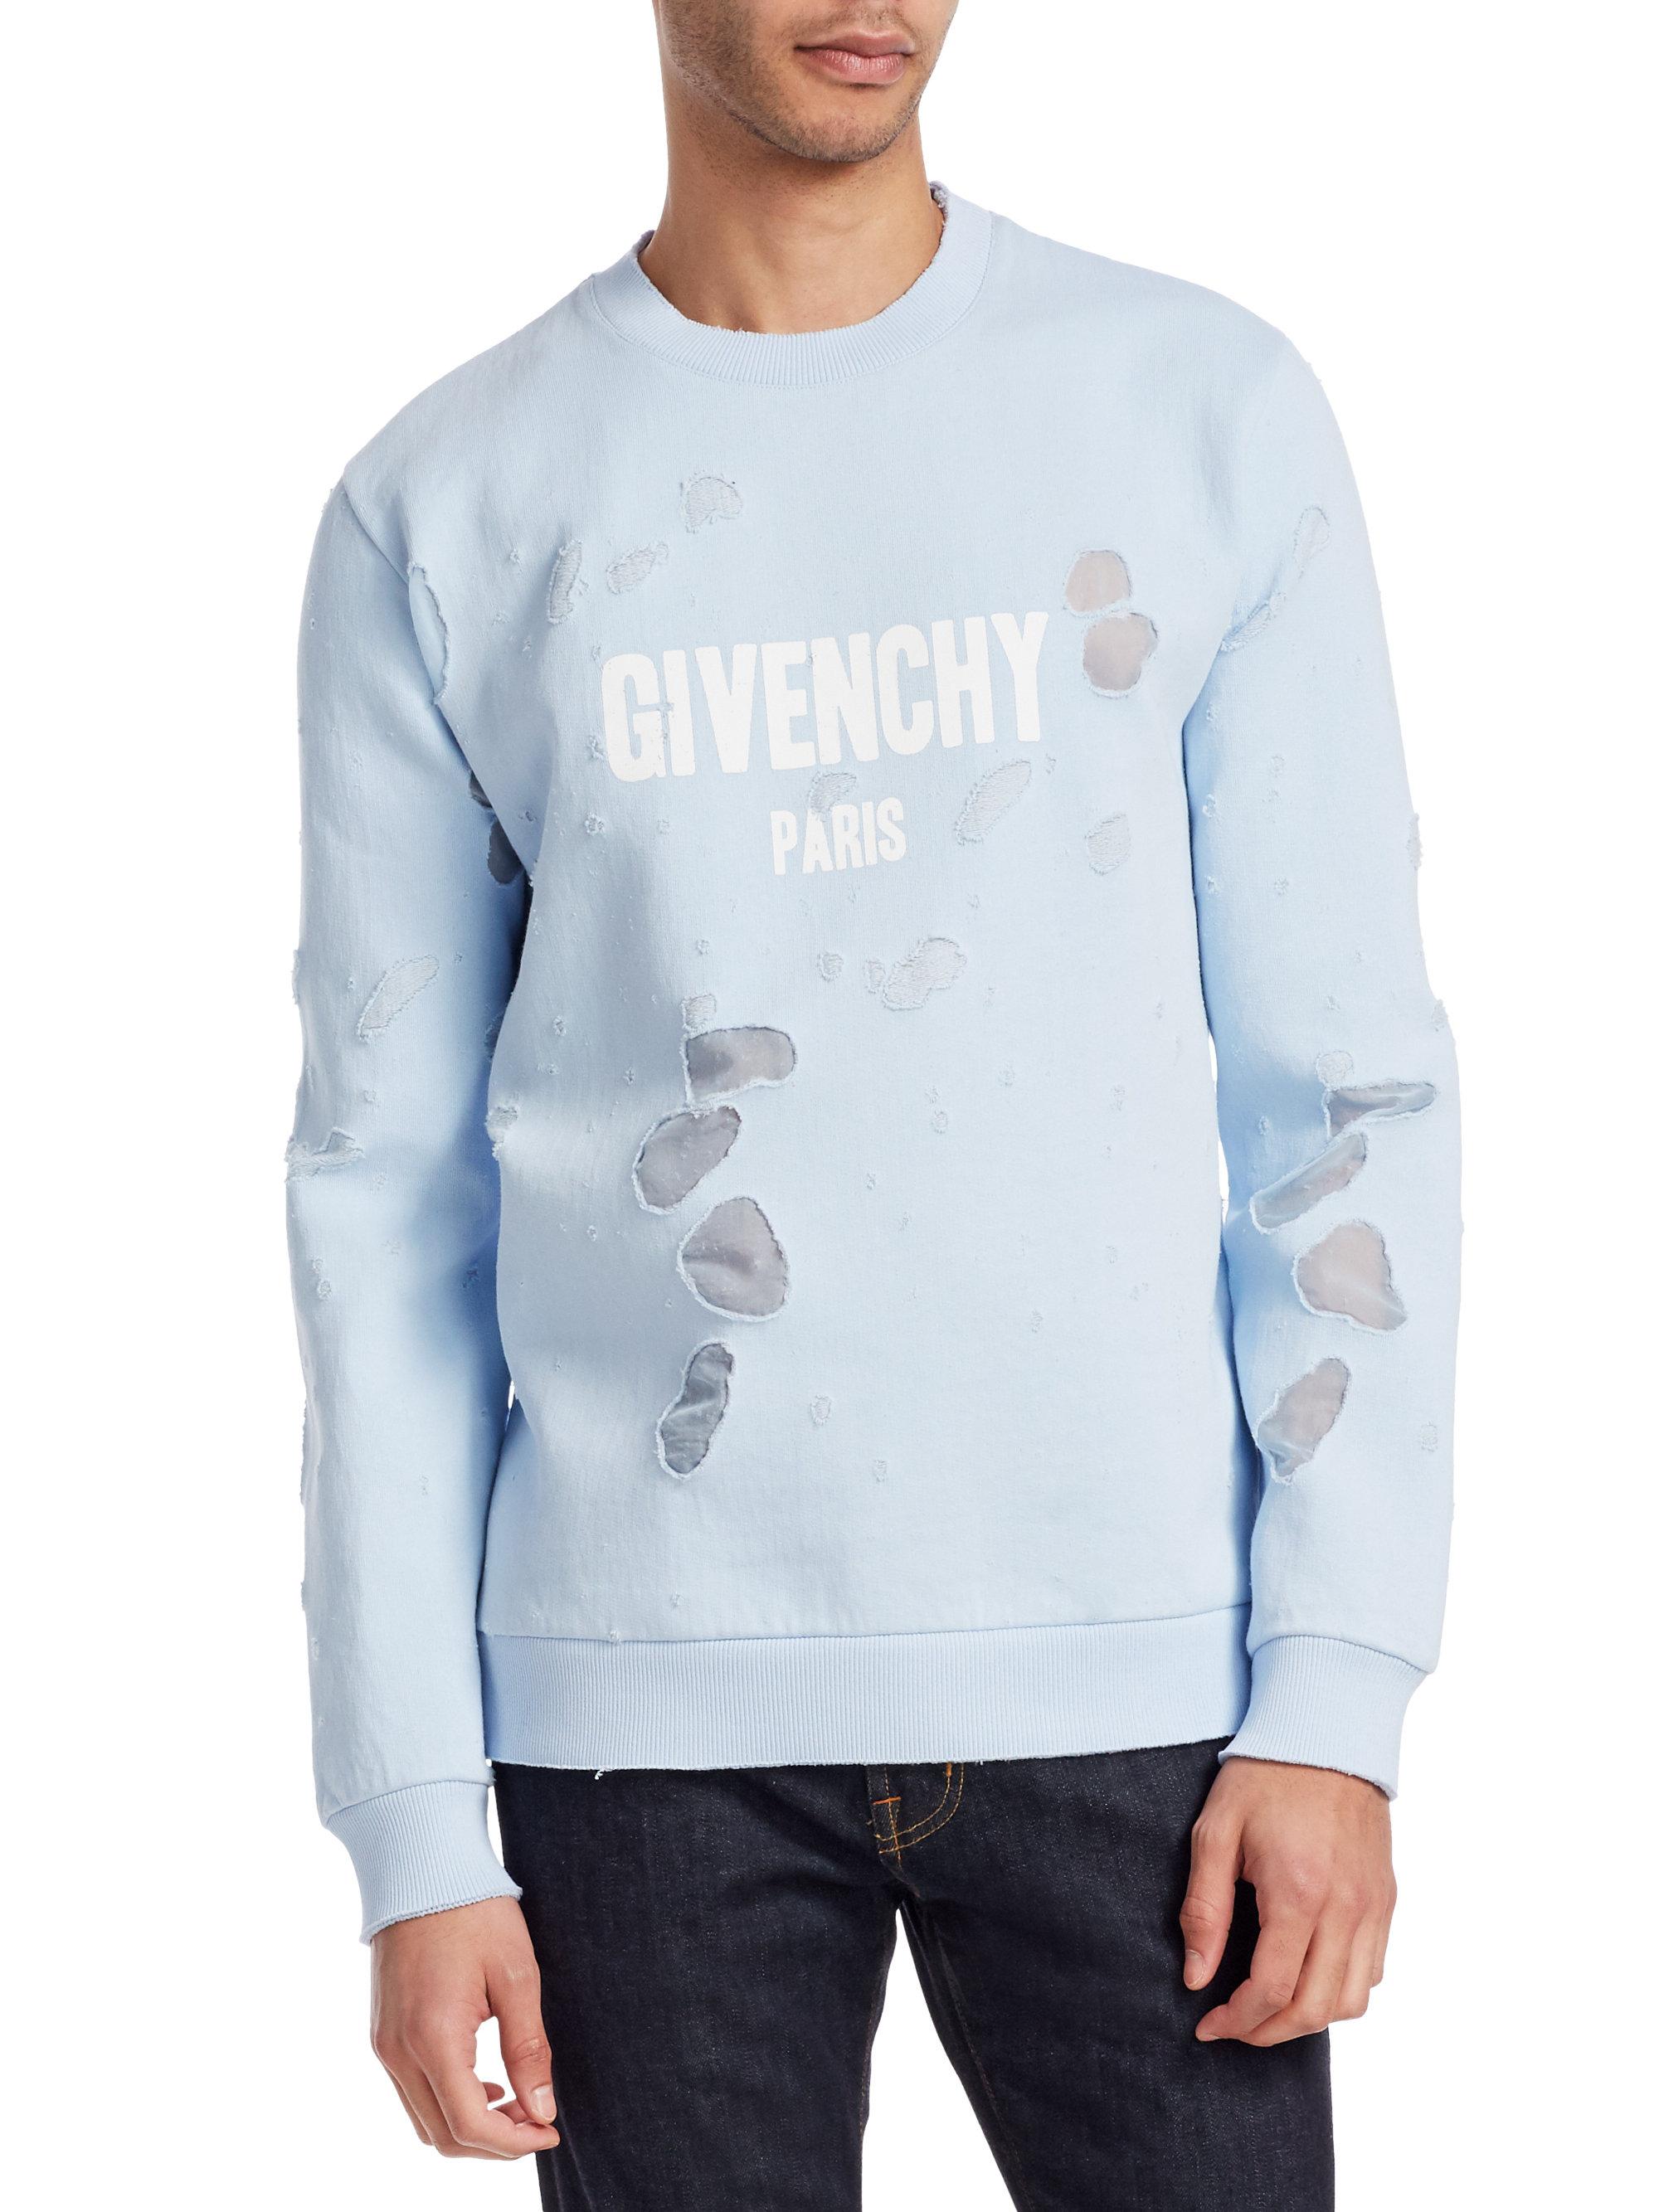 blue givenchy sweater